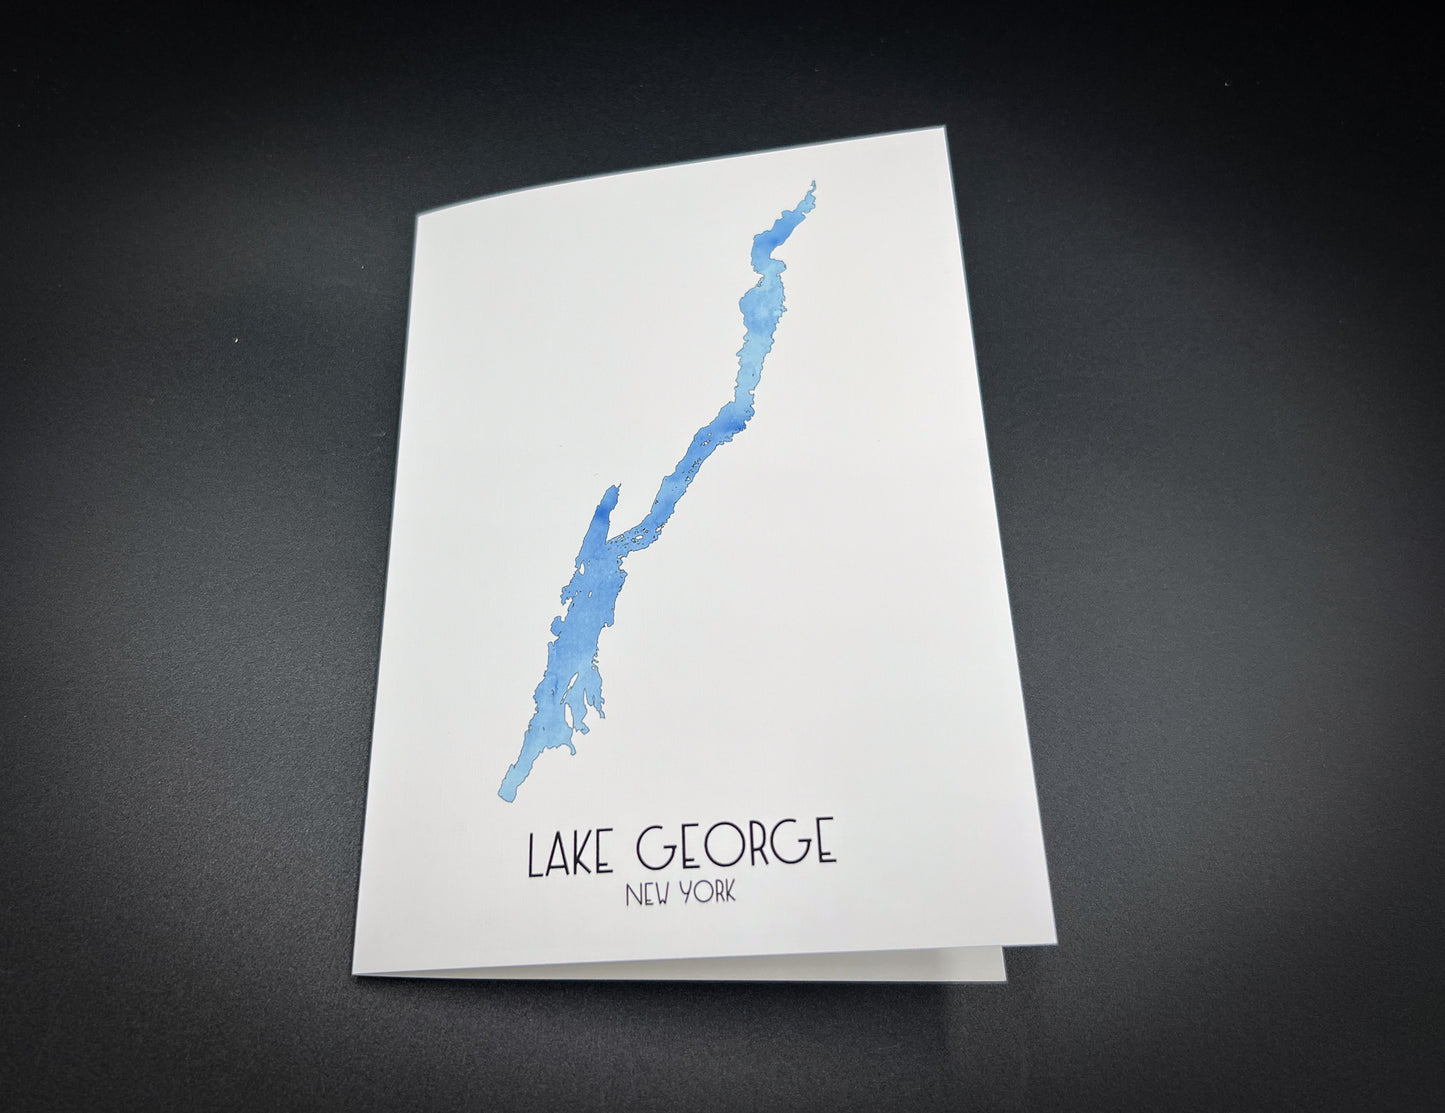 Make my Lake greeting card and home decoration